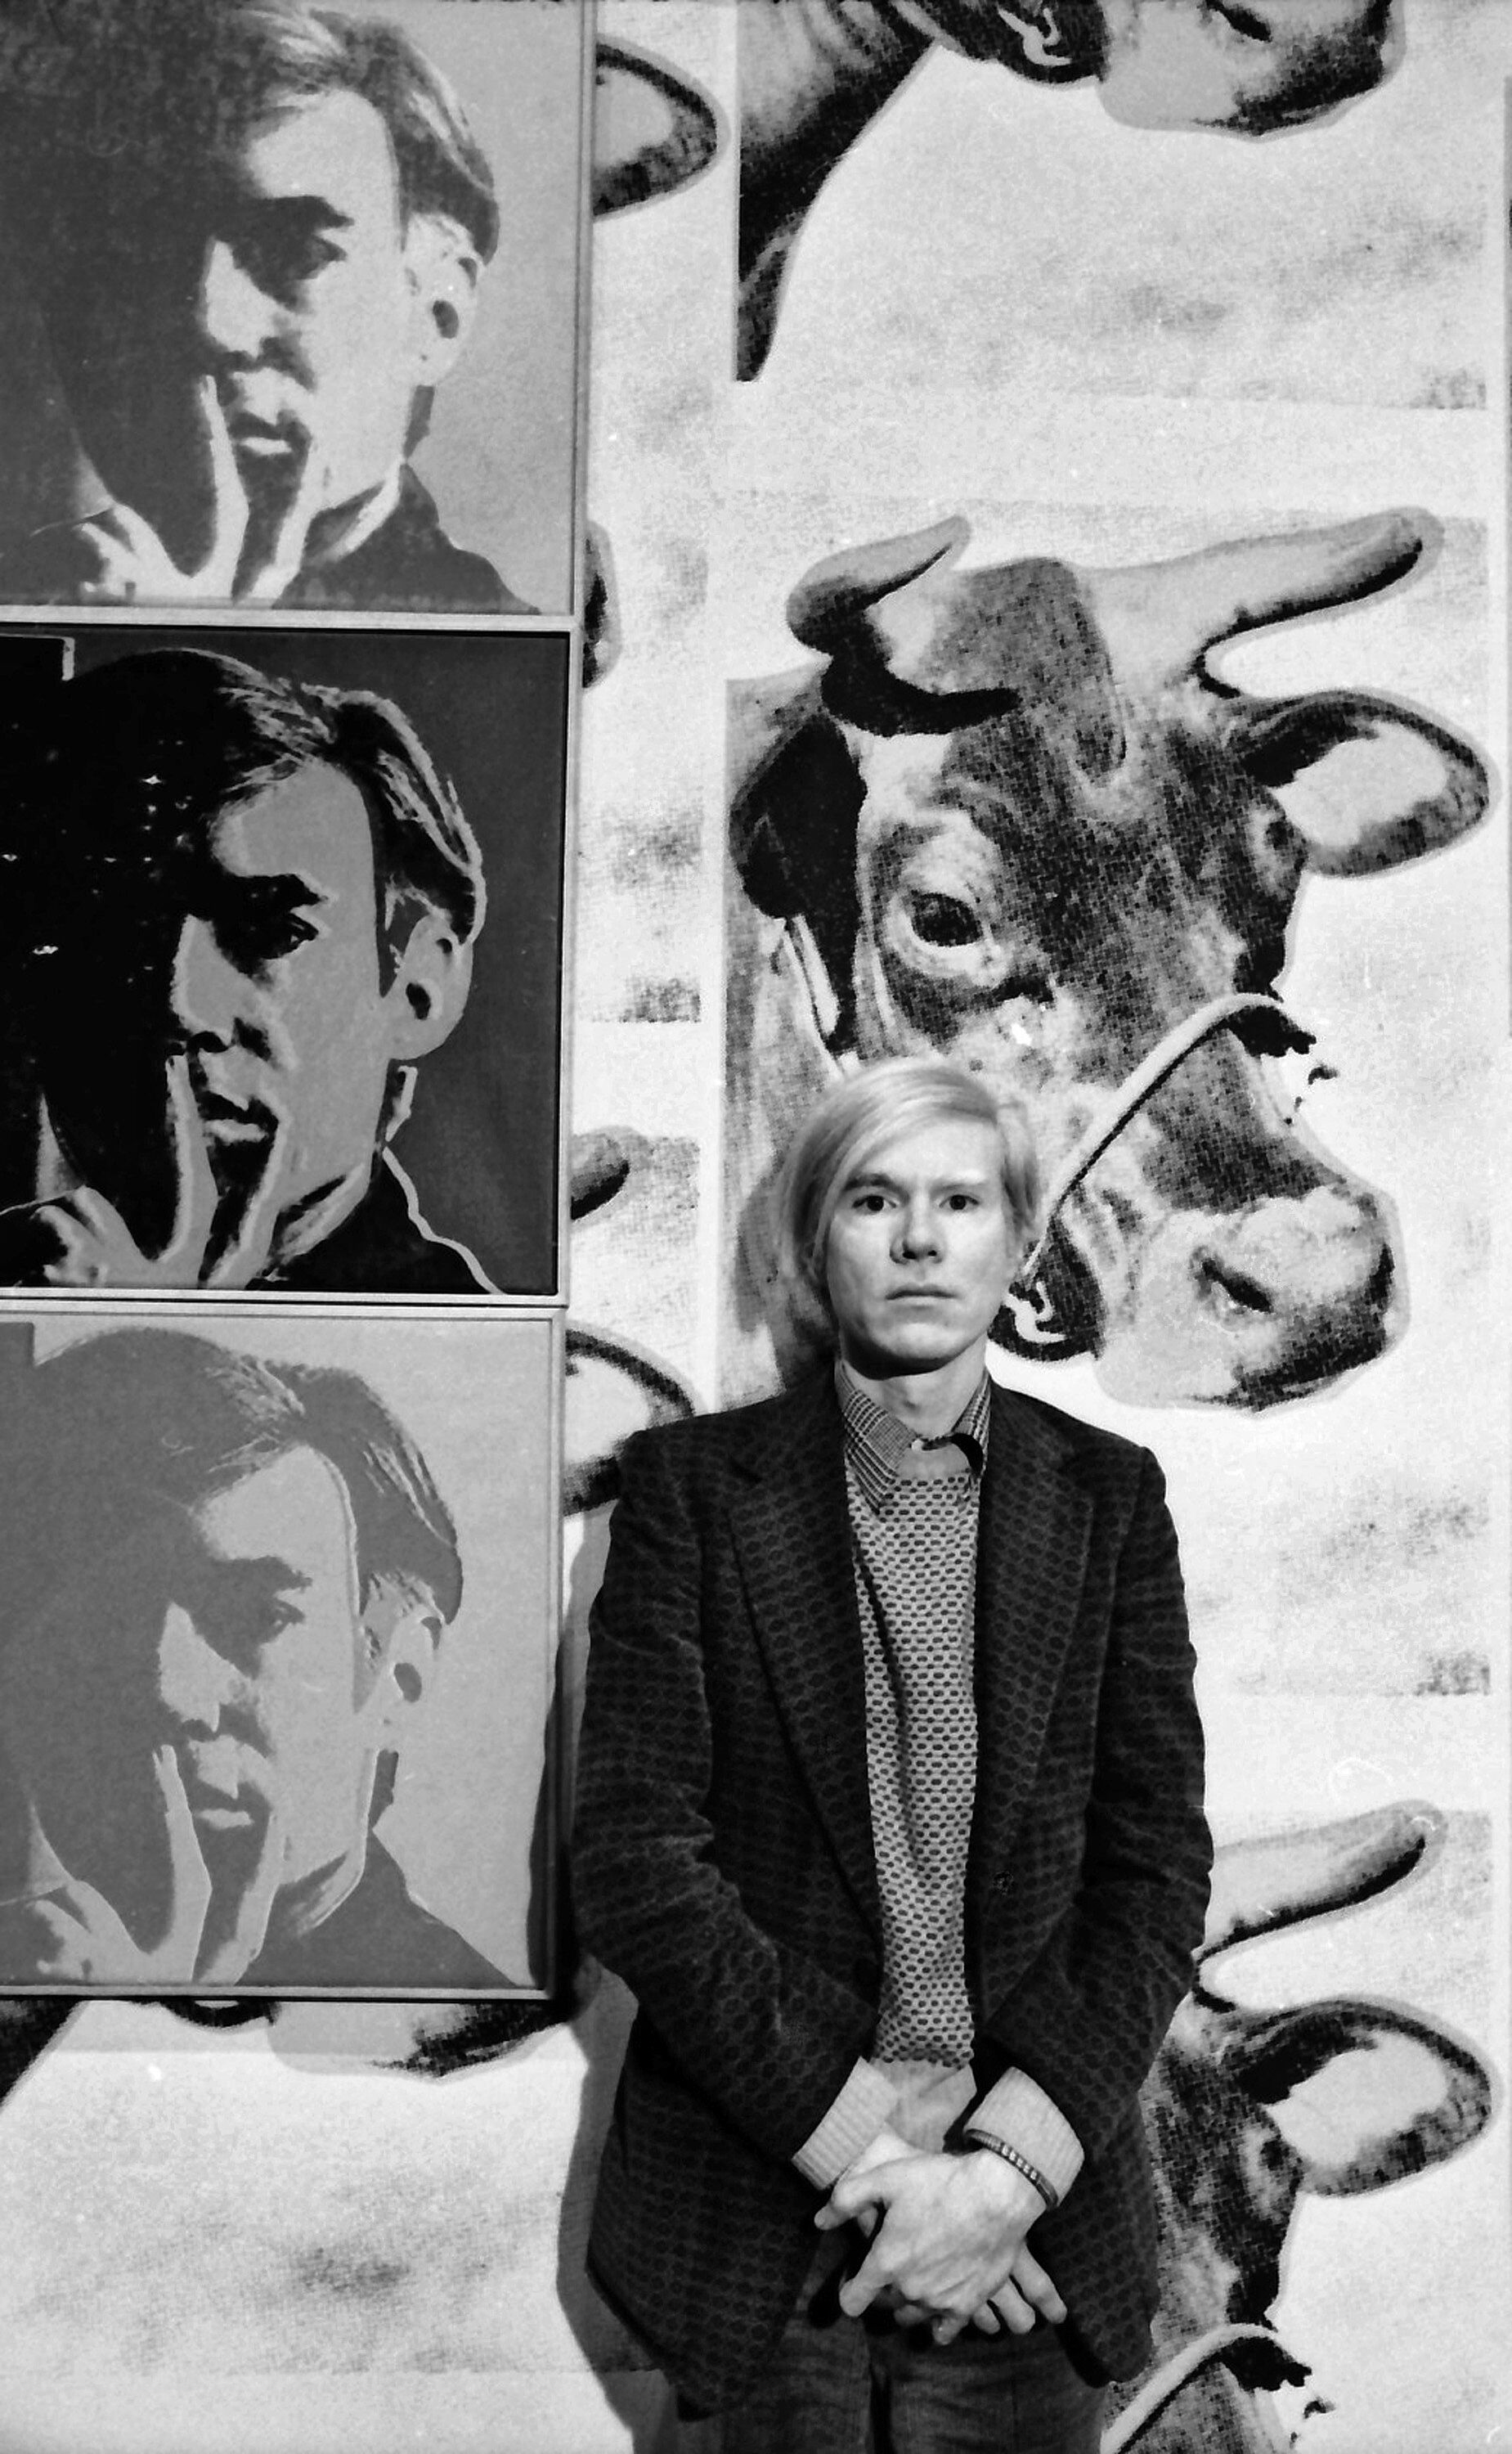 Andy Warhol sitting in front of his work.